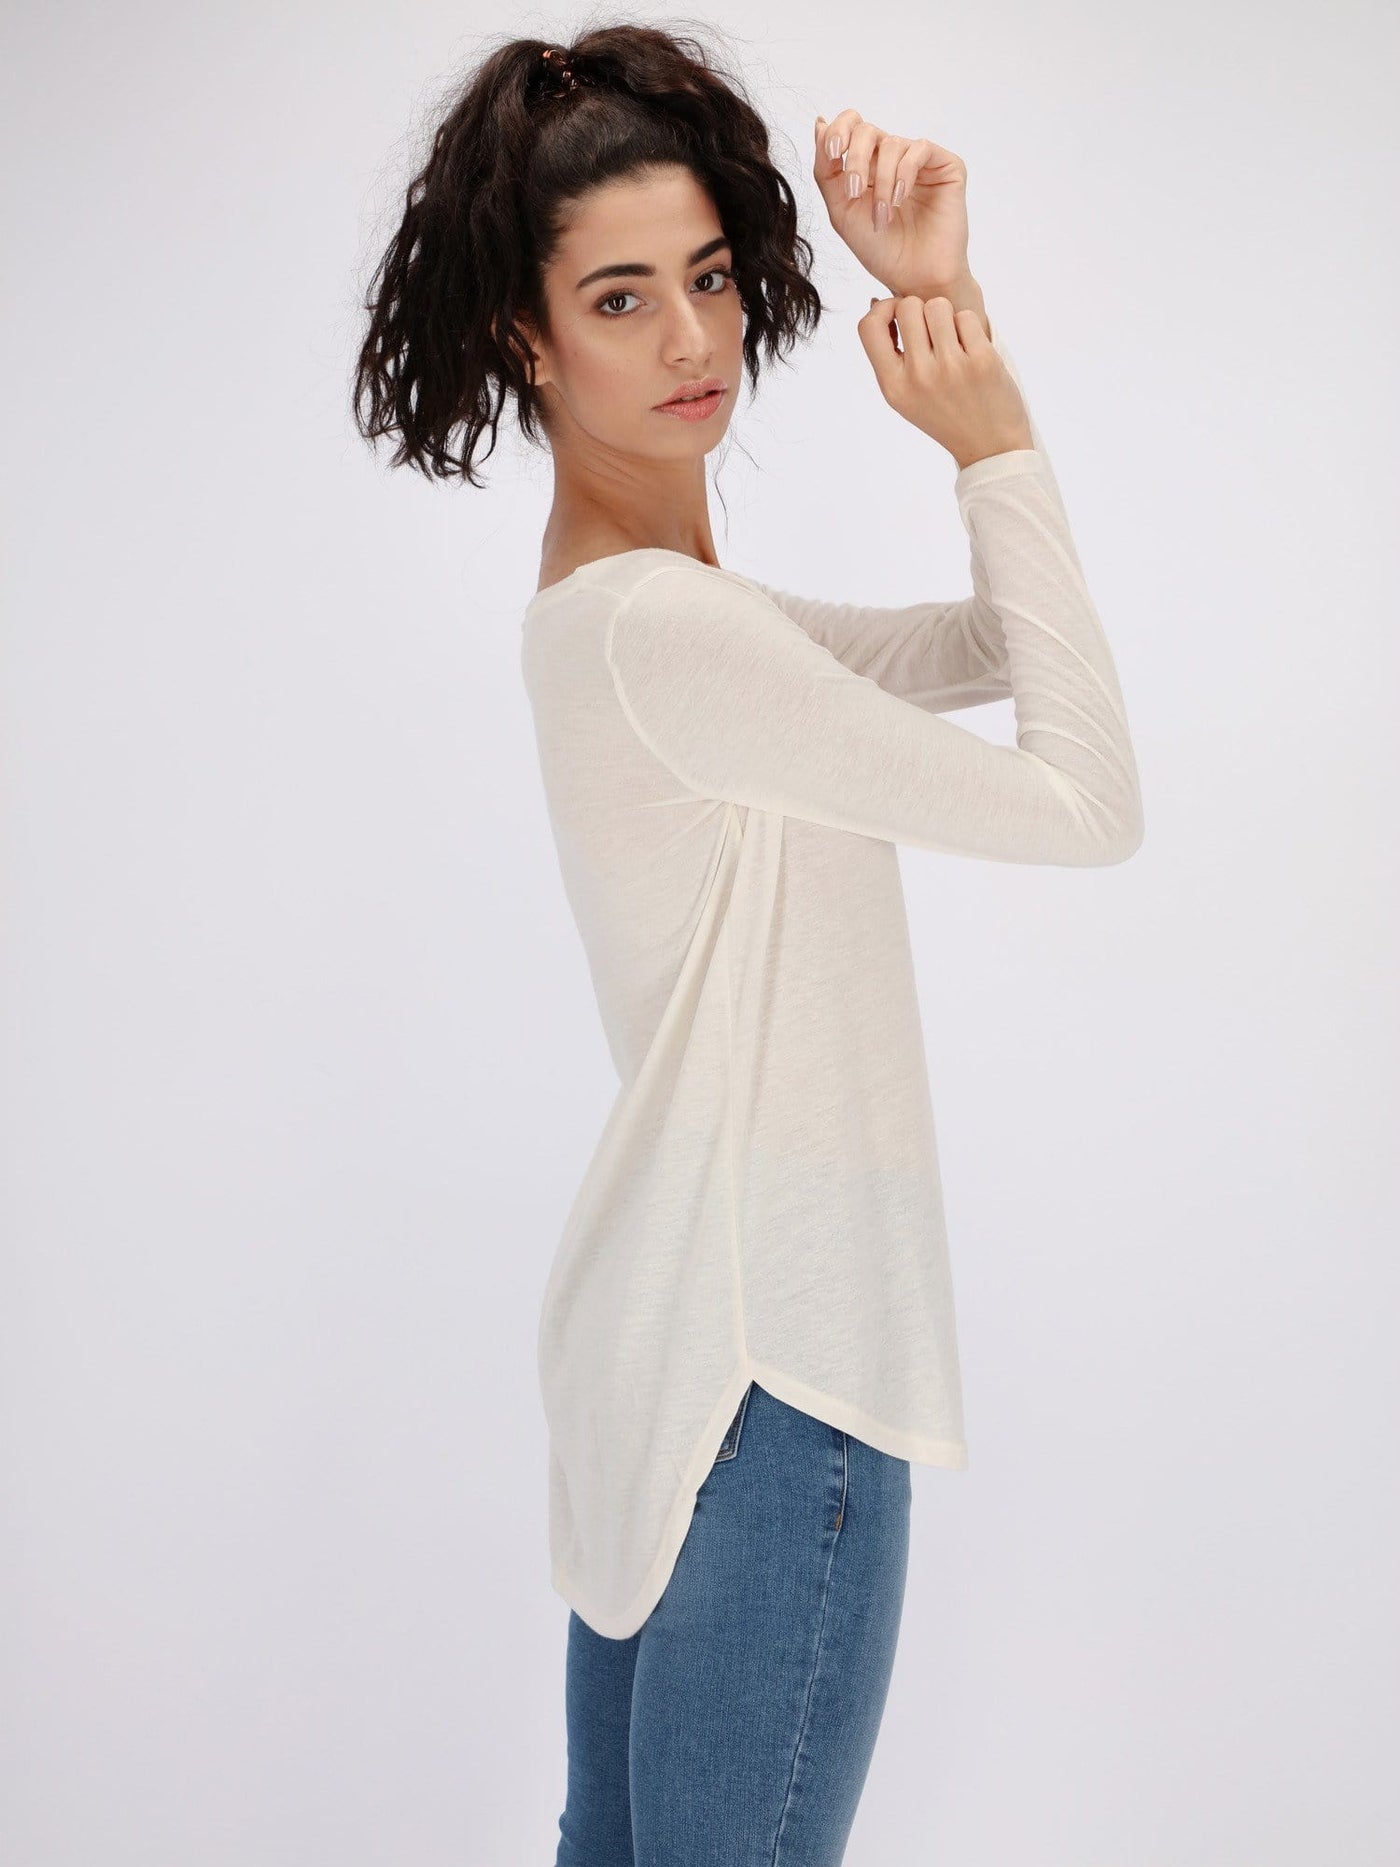 OR Tops & Blouses Heather Long Sleeve Knitted Top